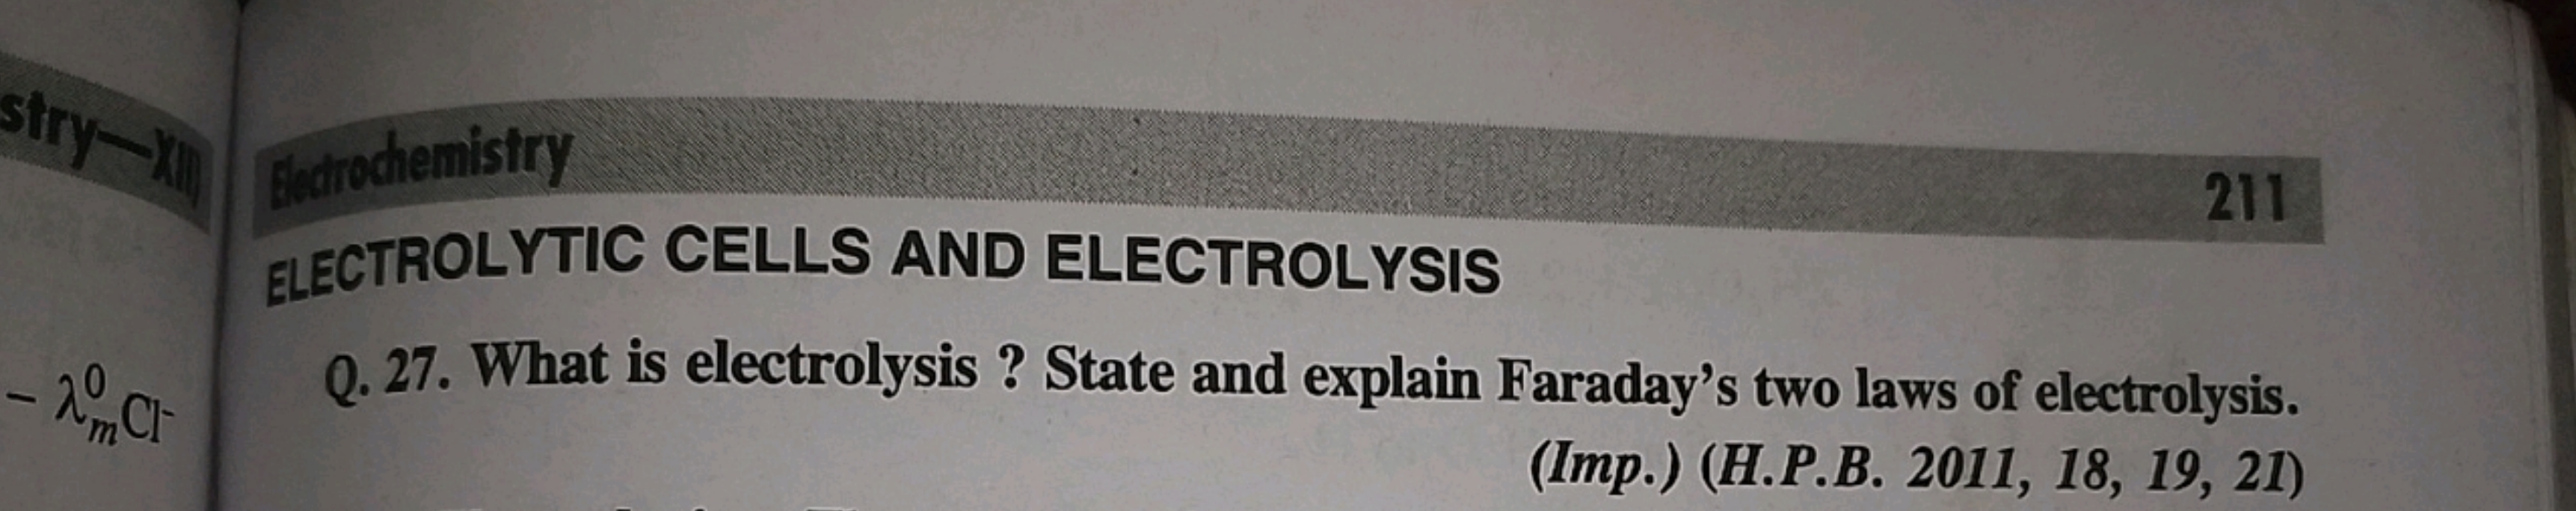 El ditochemisiry
211 ELECTROLYTIC CELLS AND ELECTROLYSIS
Q. 27. What i